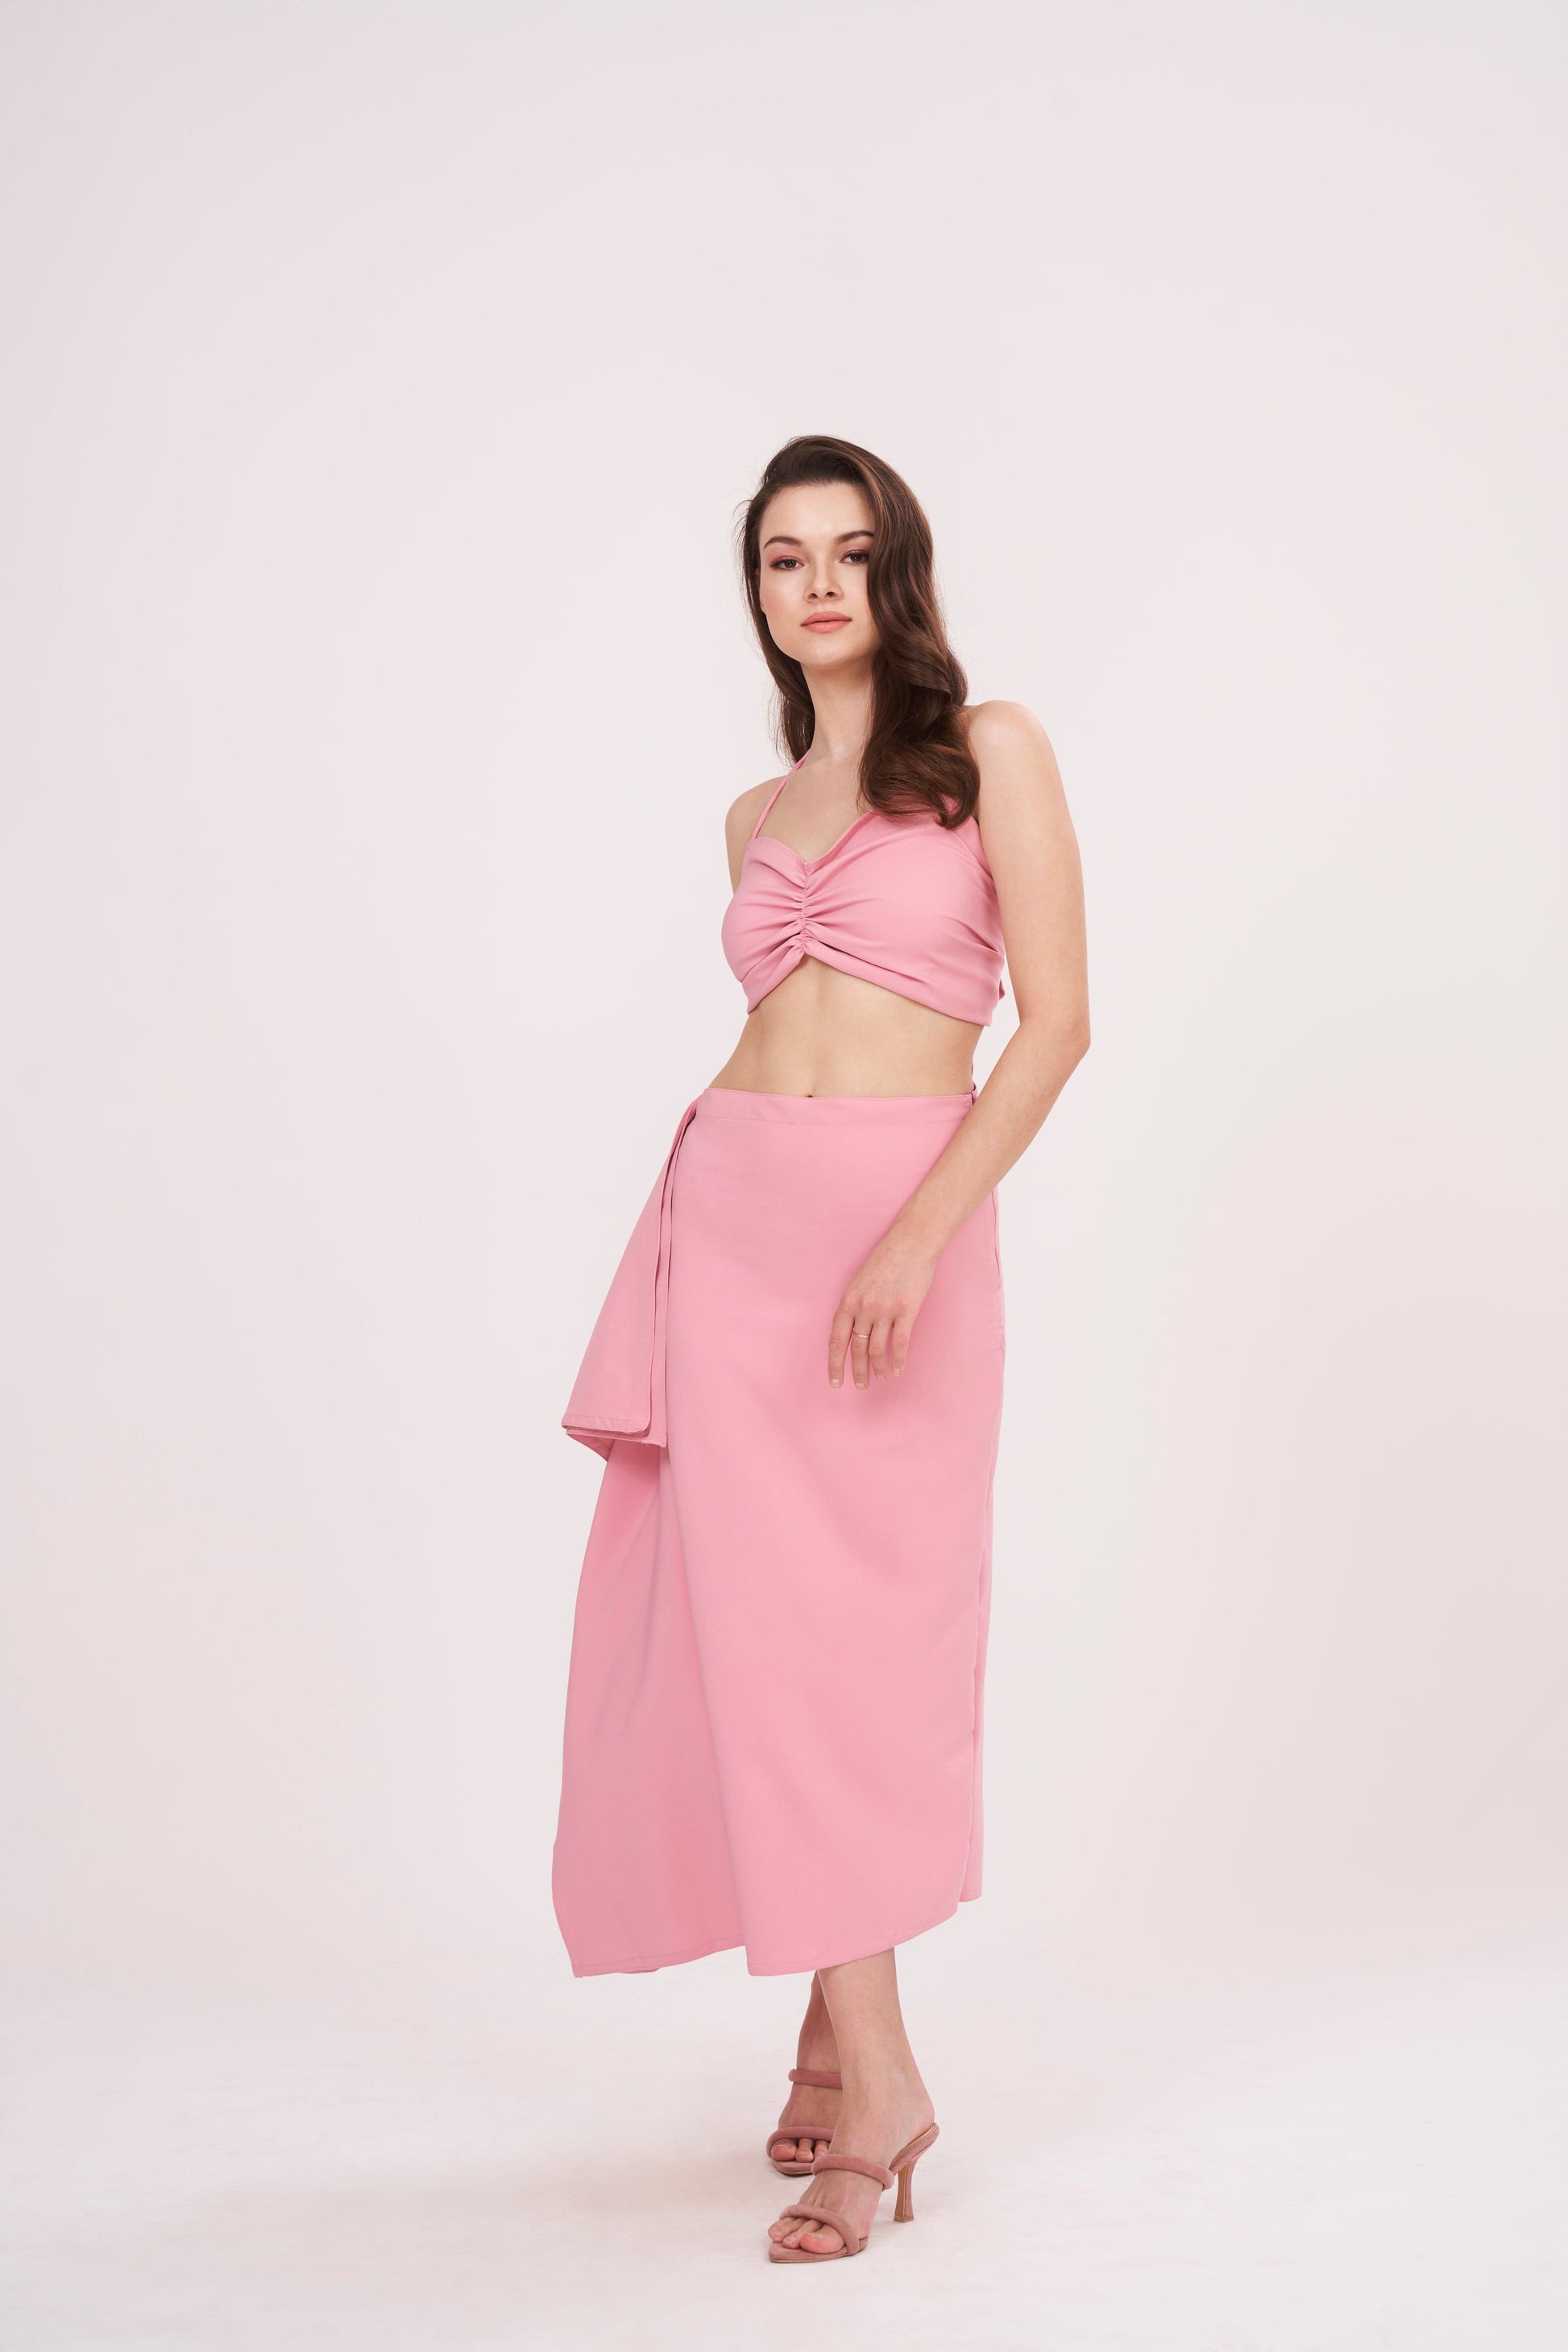 Pink skirt with playful ruffles cascading down the sides. Effortlessly complements coordinated ensemble. Suitable for any occasion.